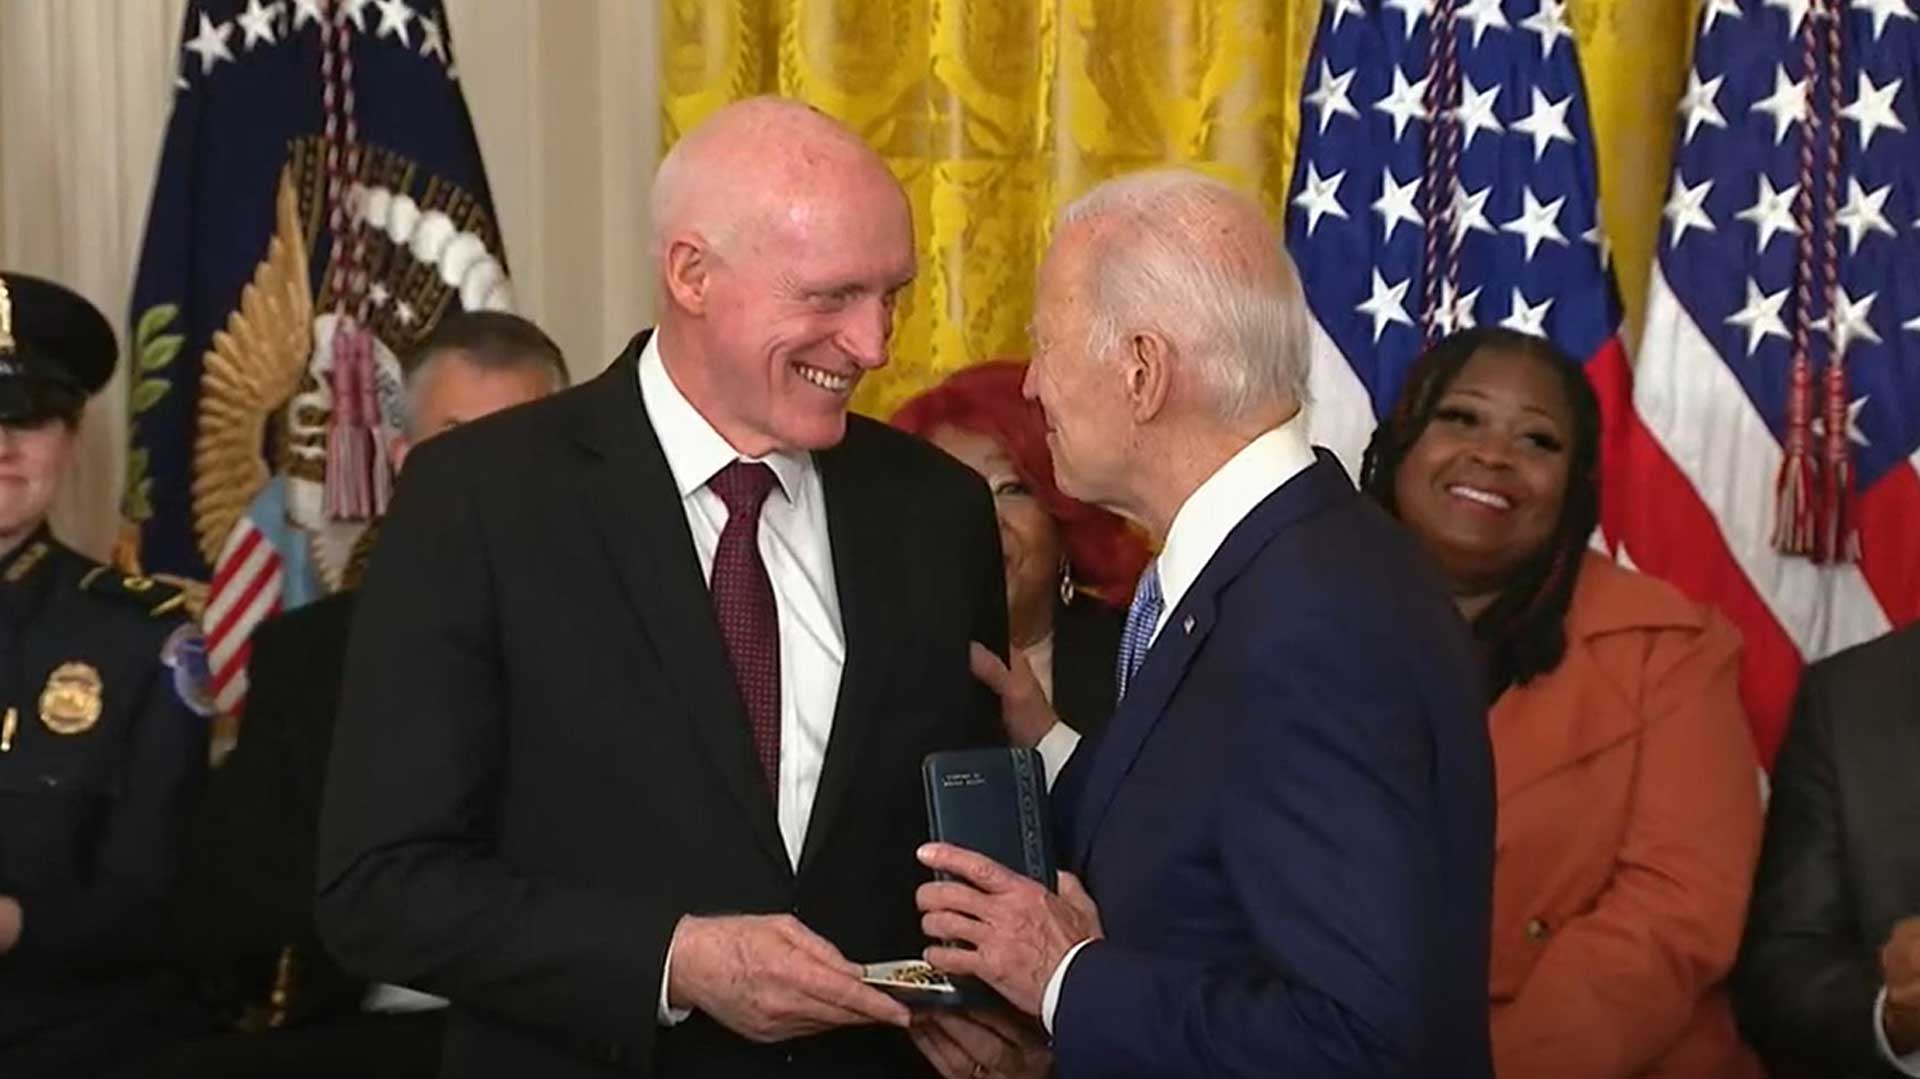 Former Arizona House Speaker Rusty Bowers, right, was one of 12 people honored by President Joe Biden on Friday, the second anniversary of the Jan. 6. insurrection, for their efforts to defend democracy during and after the attack on the Capitol.